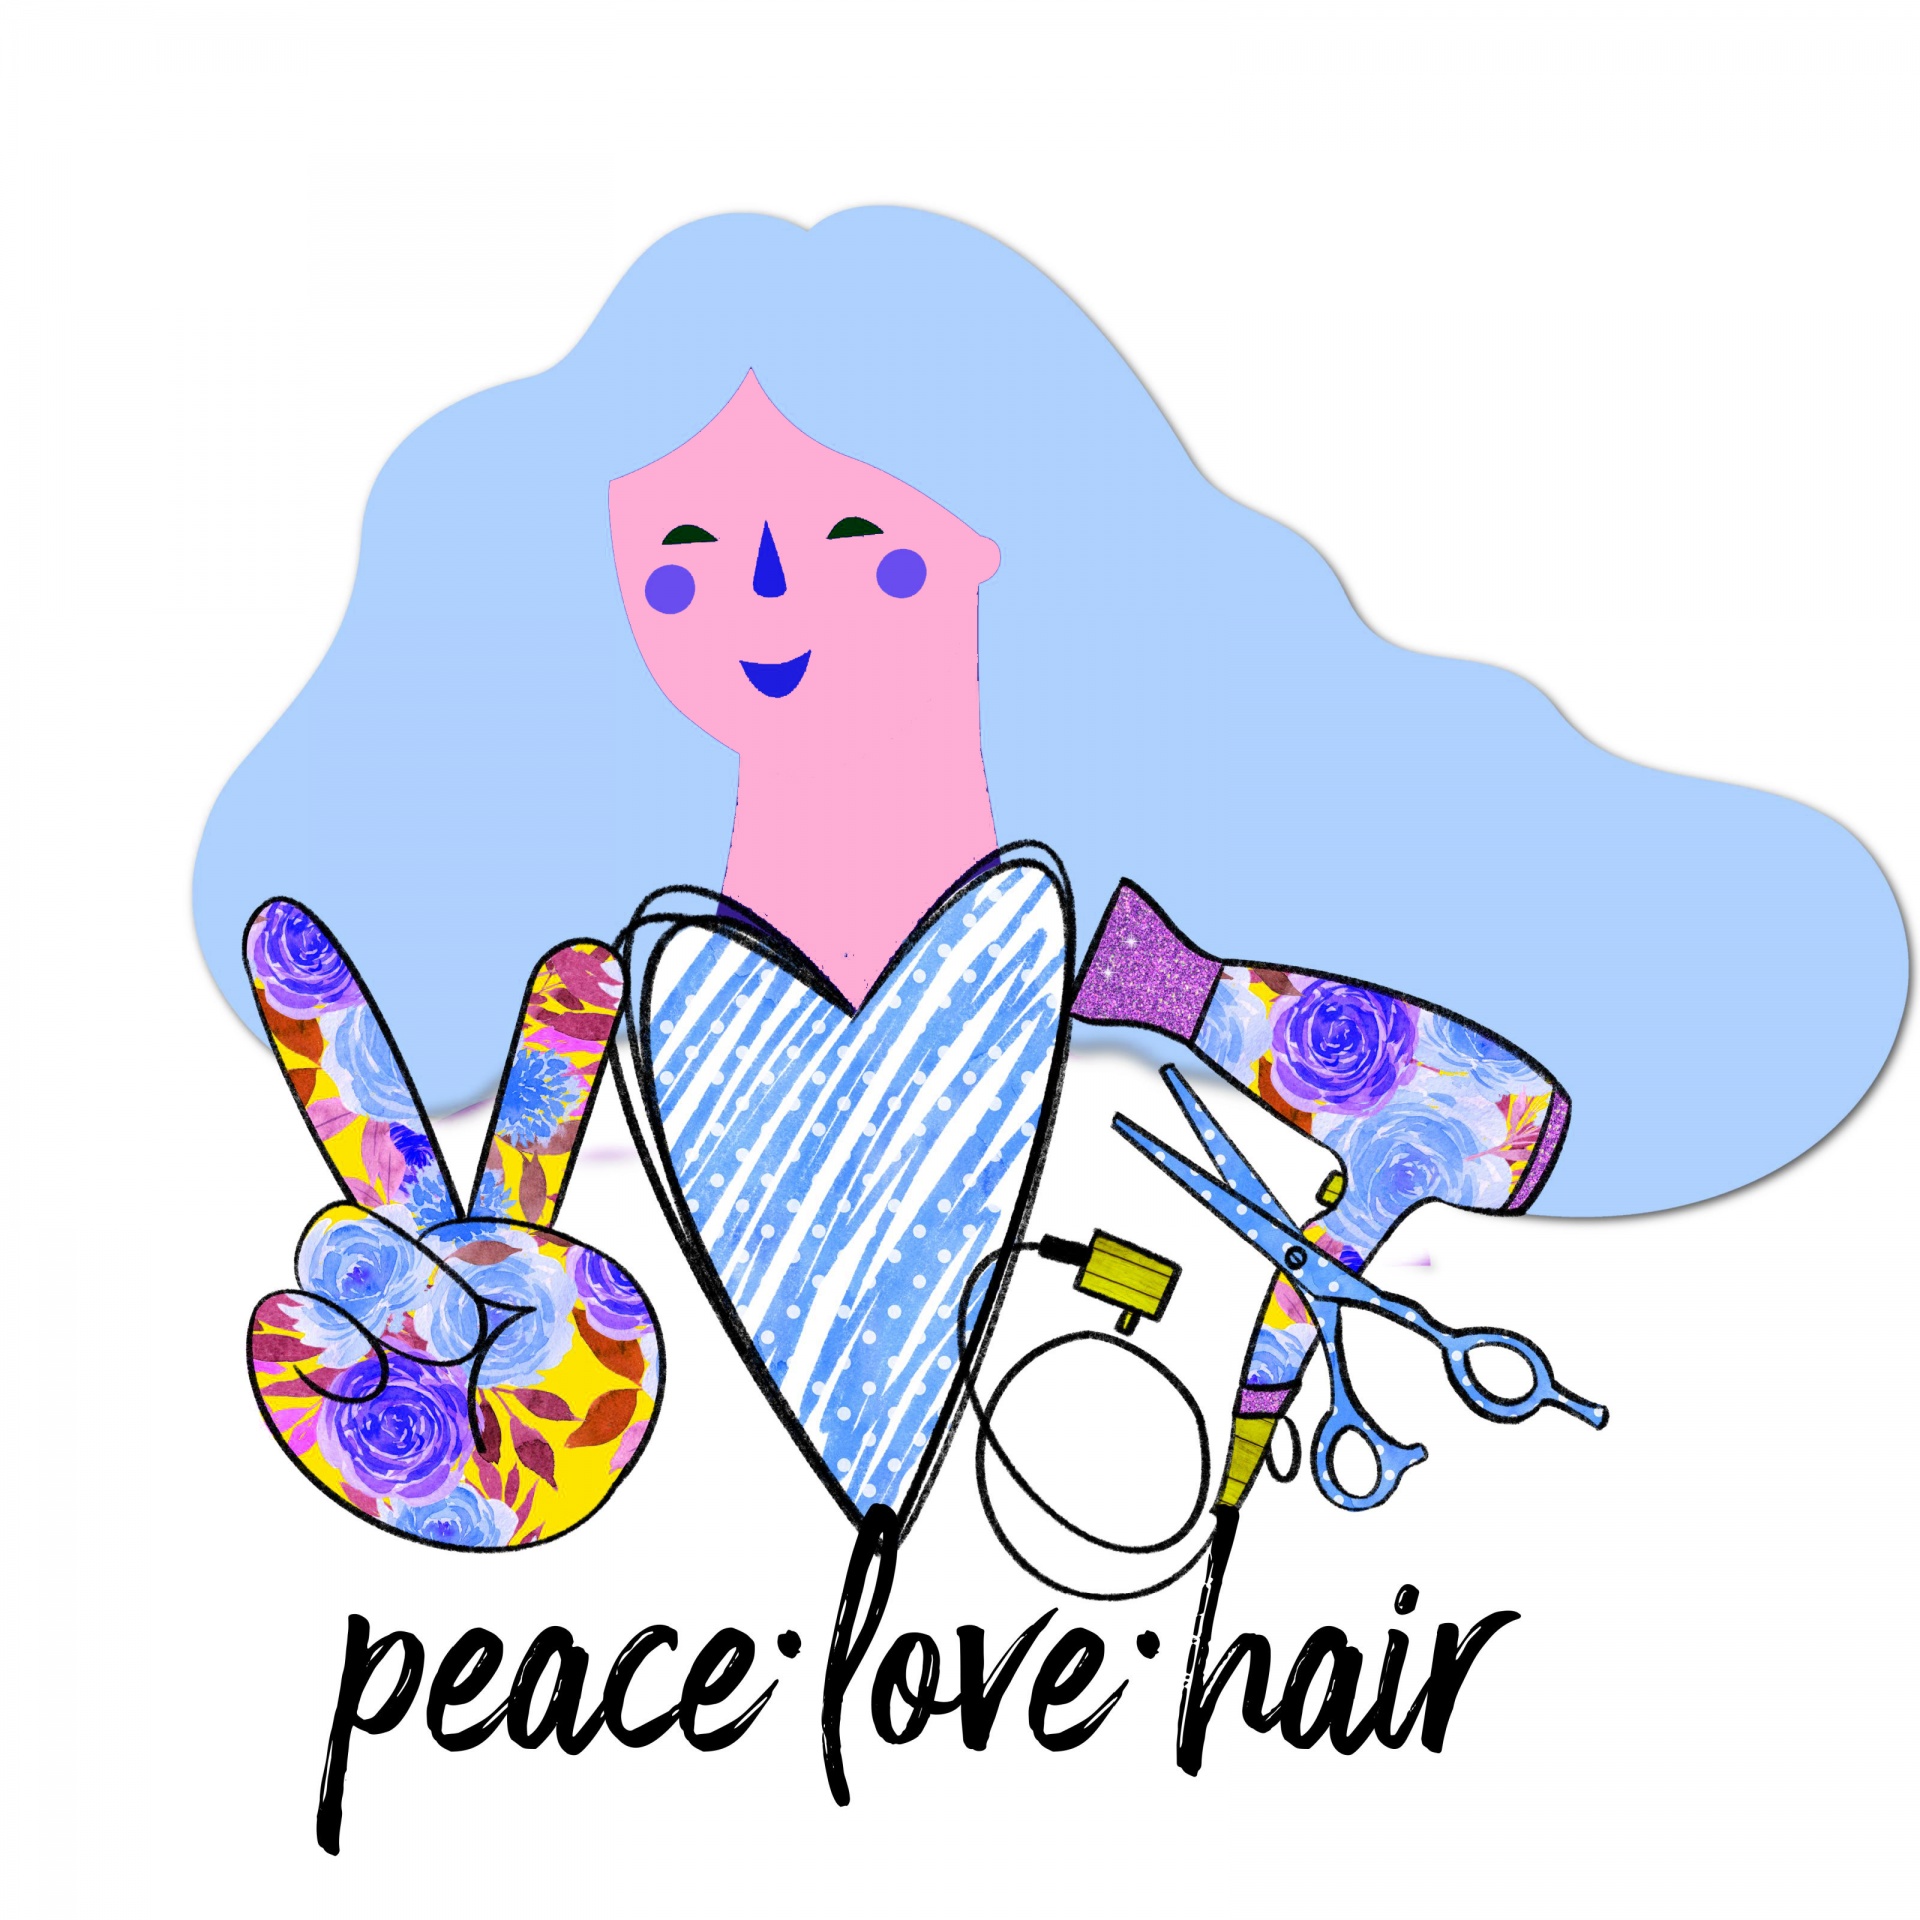 colorful fun poster of a girl with big hair and fingers giving the peace sign, a heart and a hair dryer